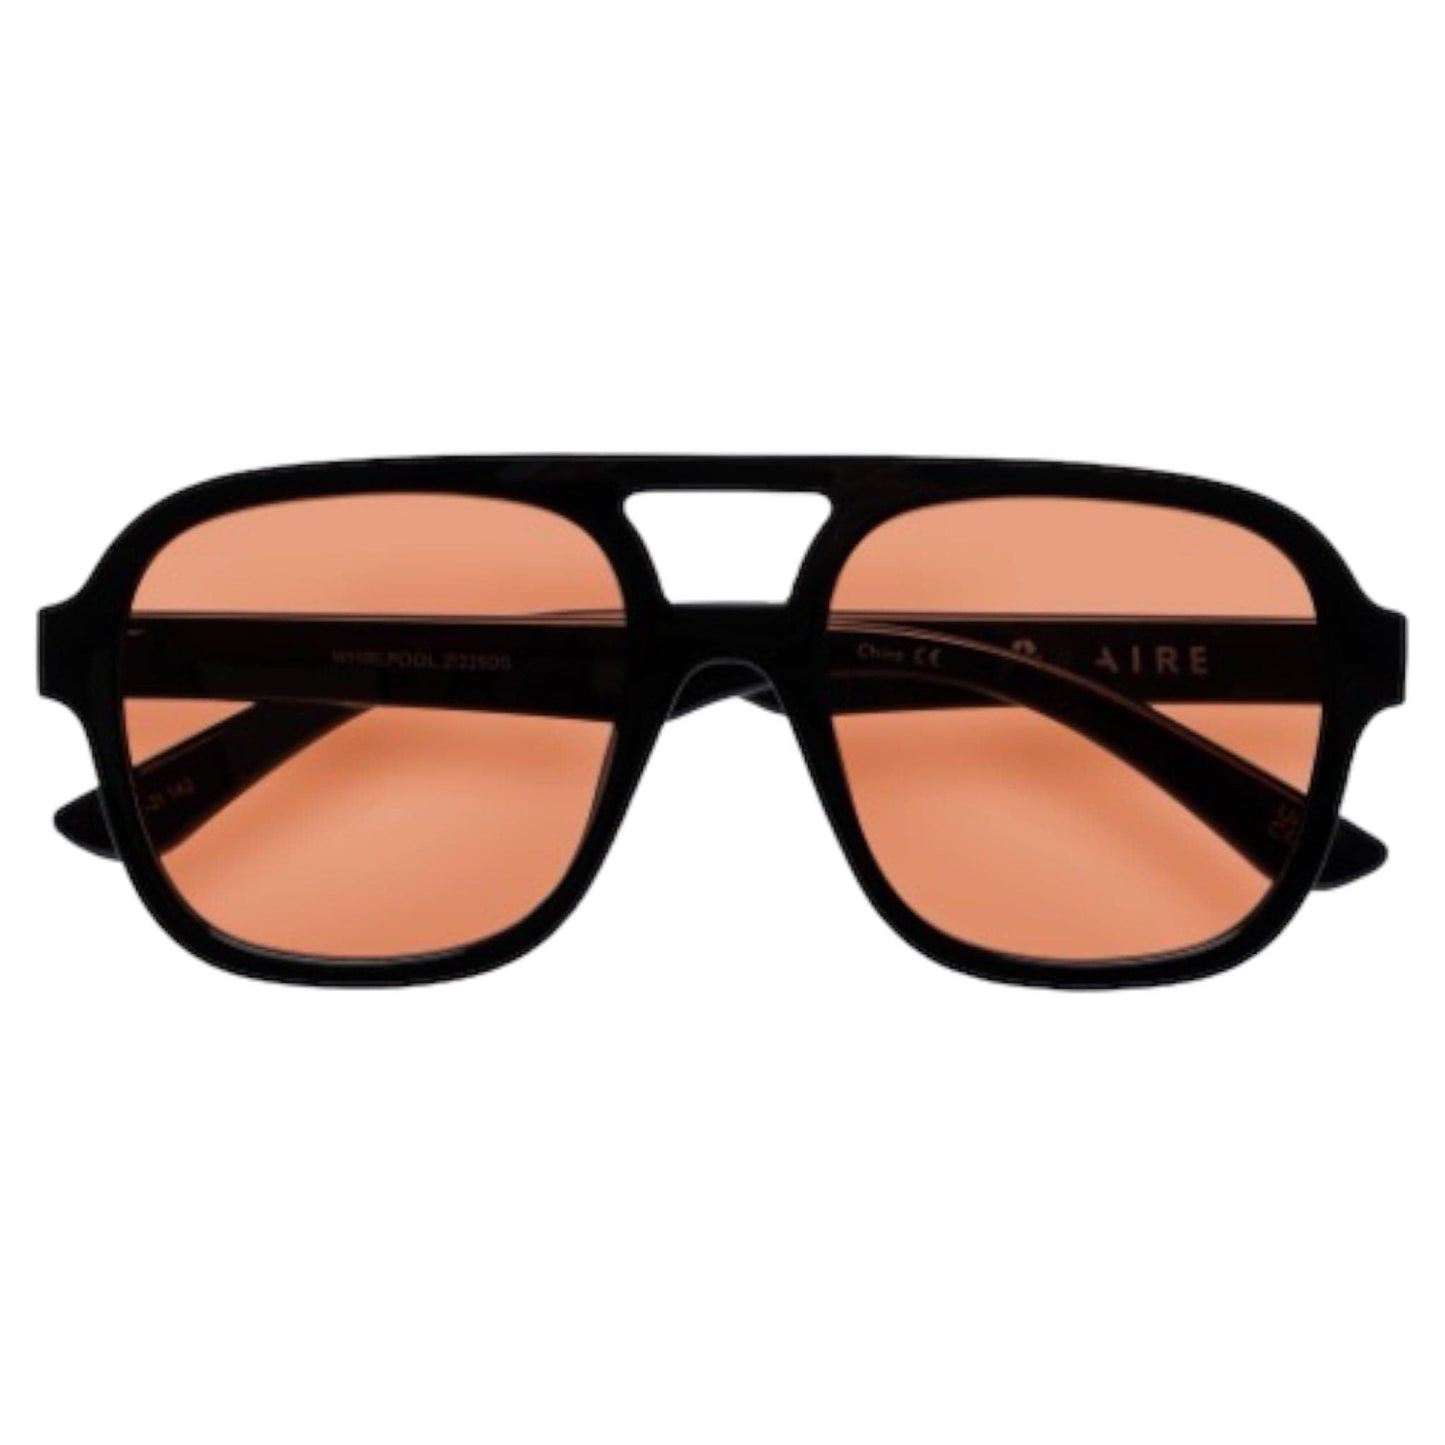 Aire Whirlpool Sunglasses in Black with tan tint lenses